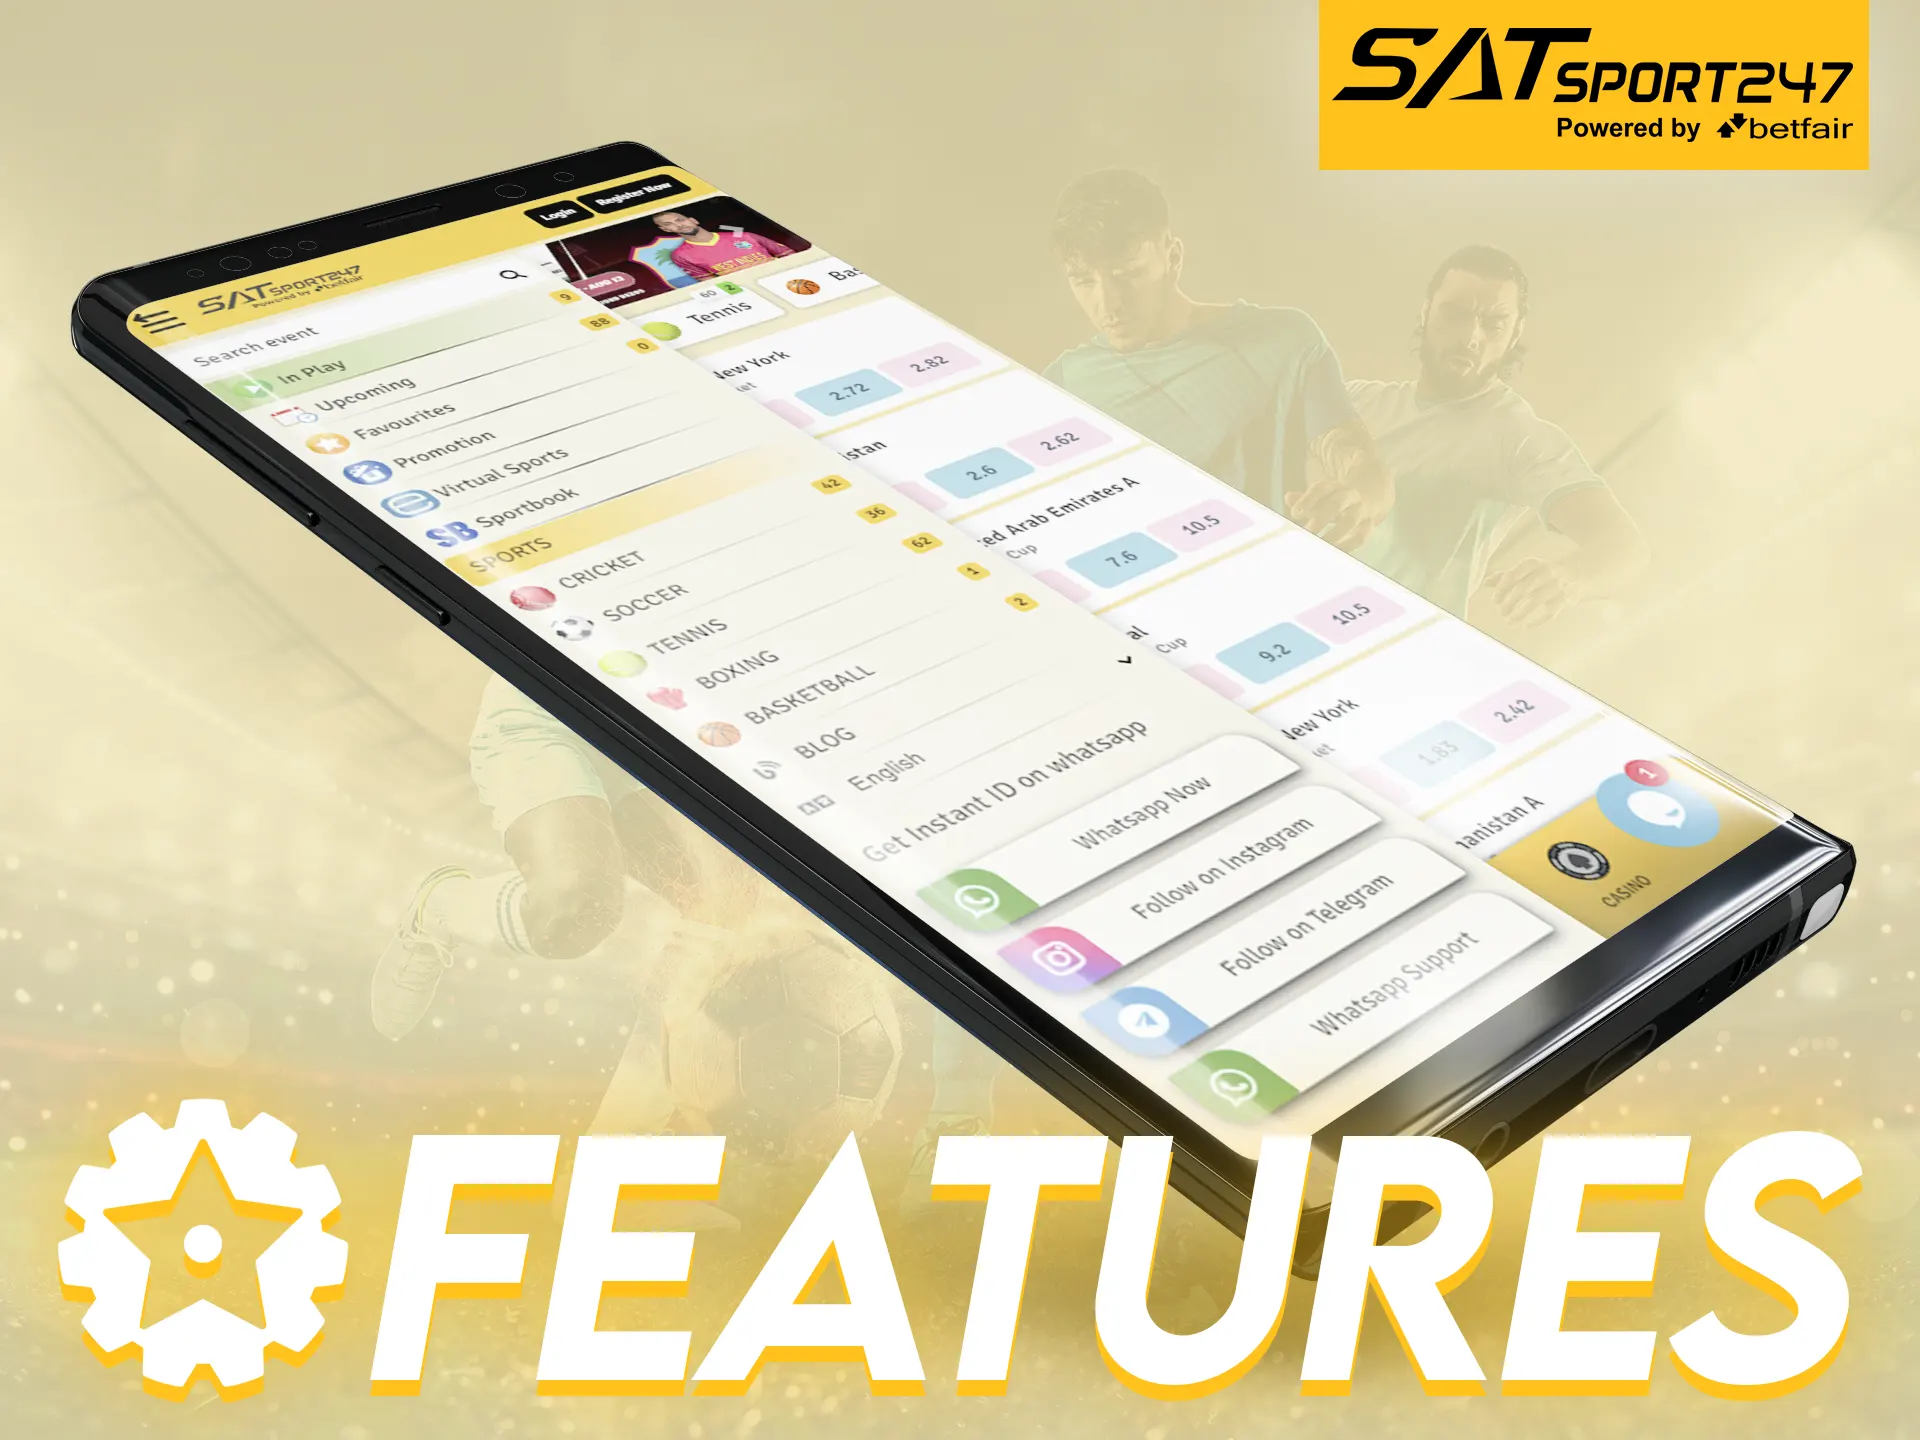 The Satsport247 app has many handy and useful features.